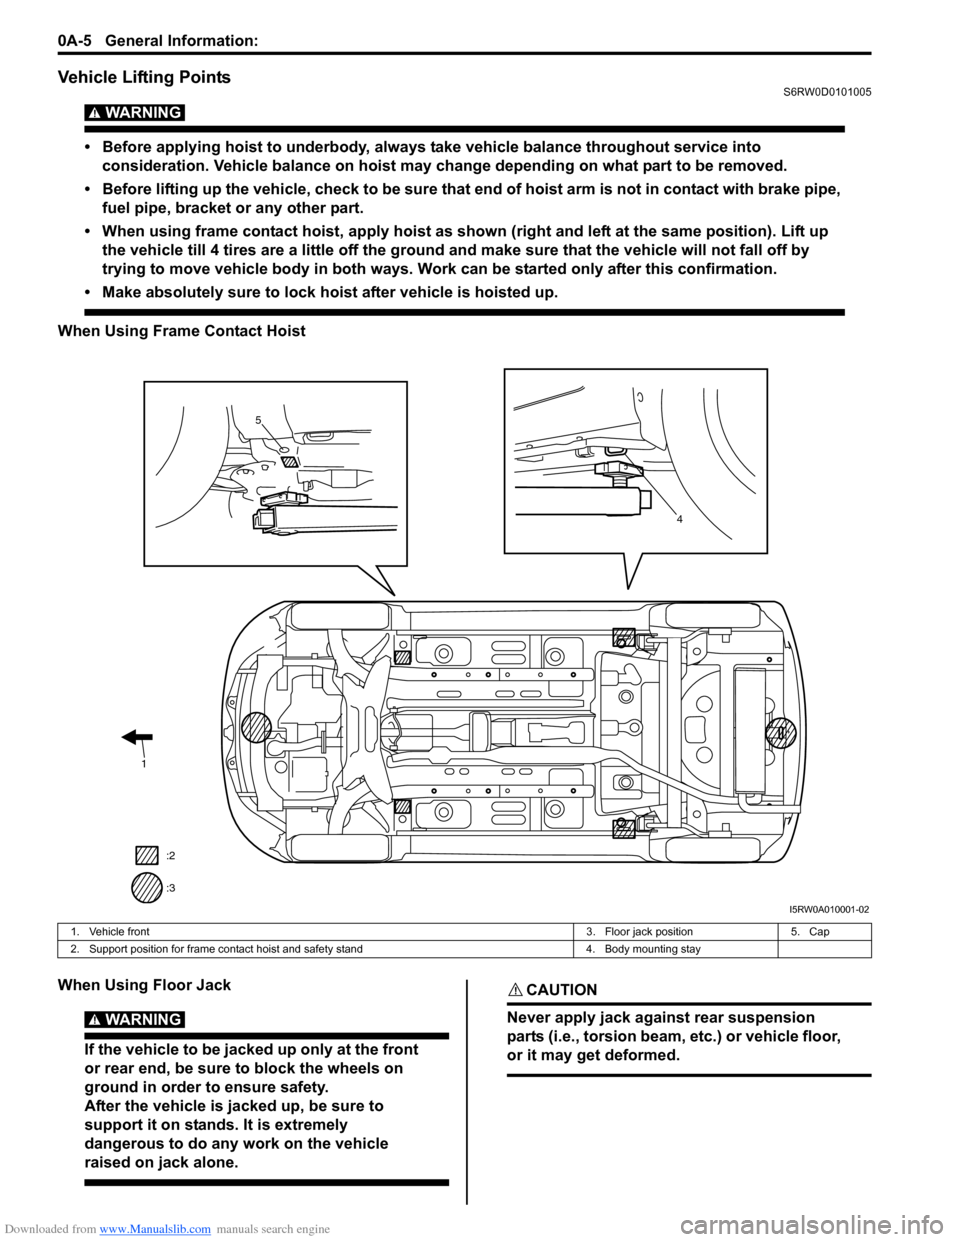 SUZUKI SX4 2006 1.G Service Workshop Manual Downloaded from www.Manualslib.com manuals search engine 0A-5 General Information: 
Vehicle Lifting PointsS6RW0D0101005
WARNING! 
• Before applying hoist to underbody, always take vehicle balance th